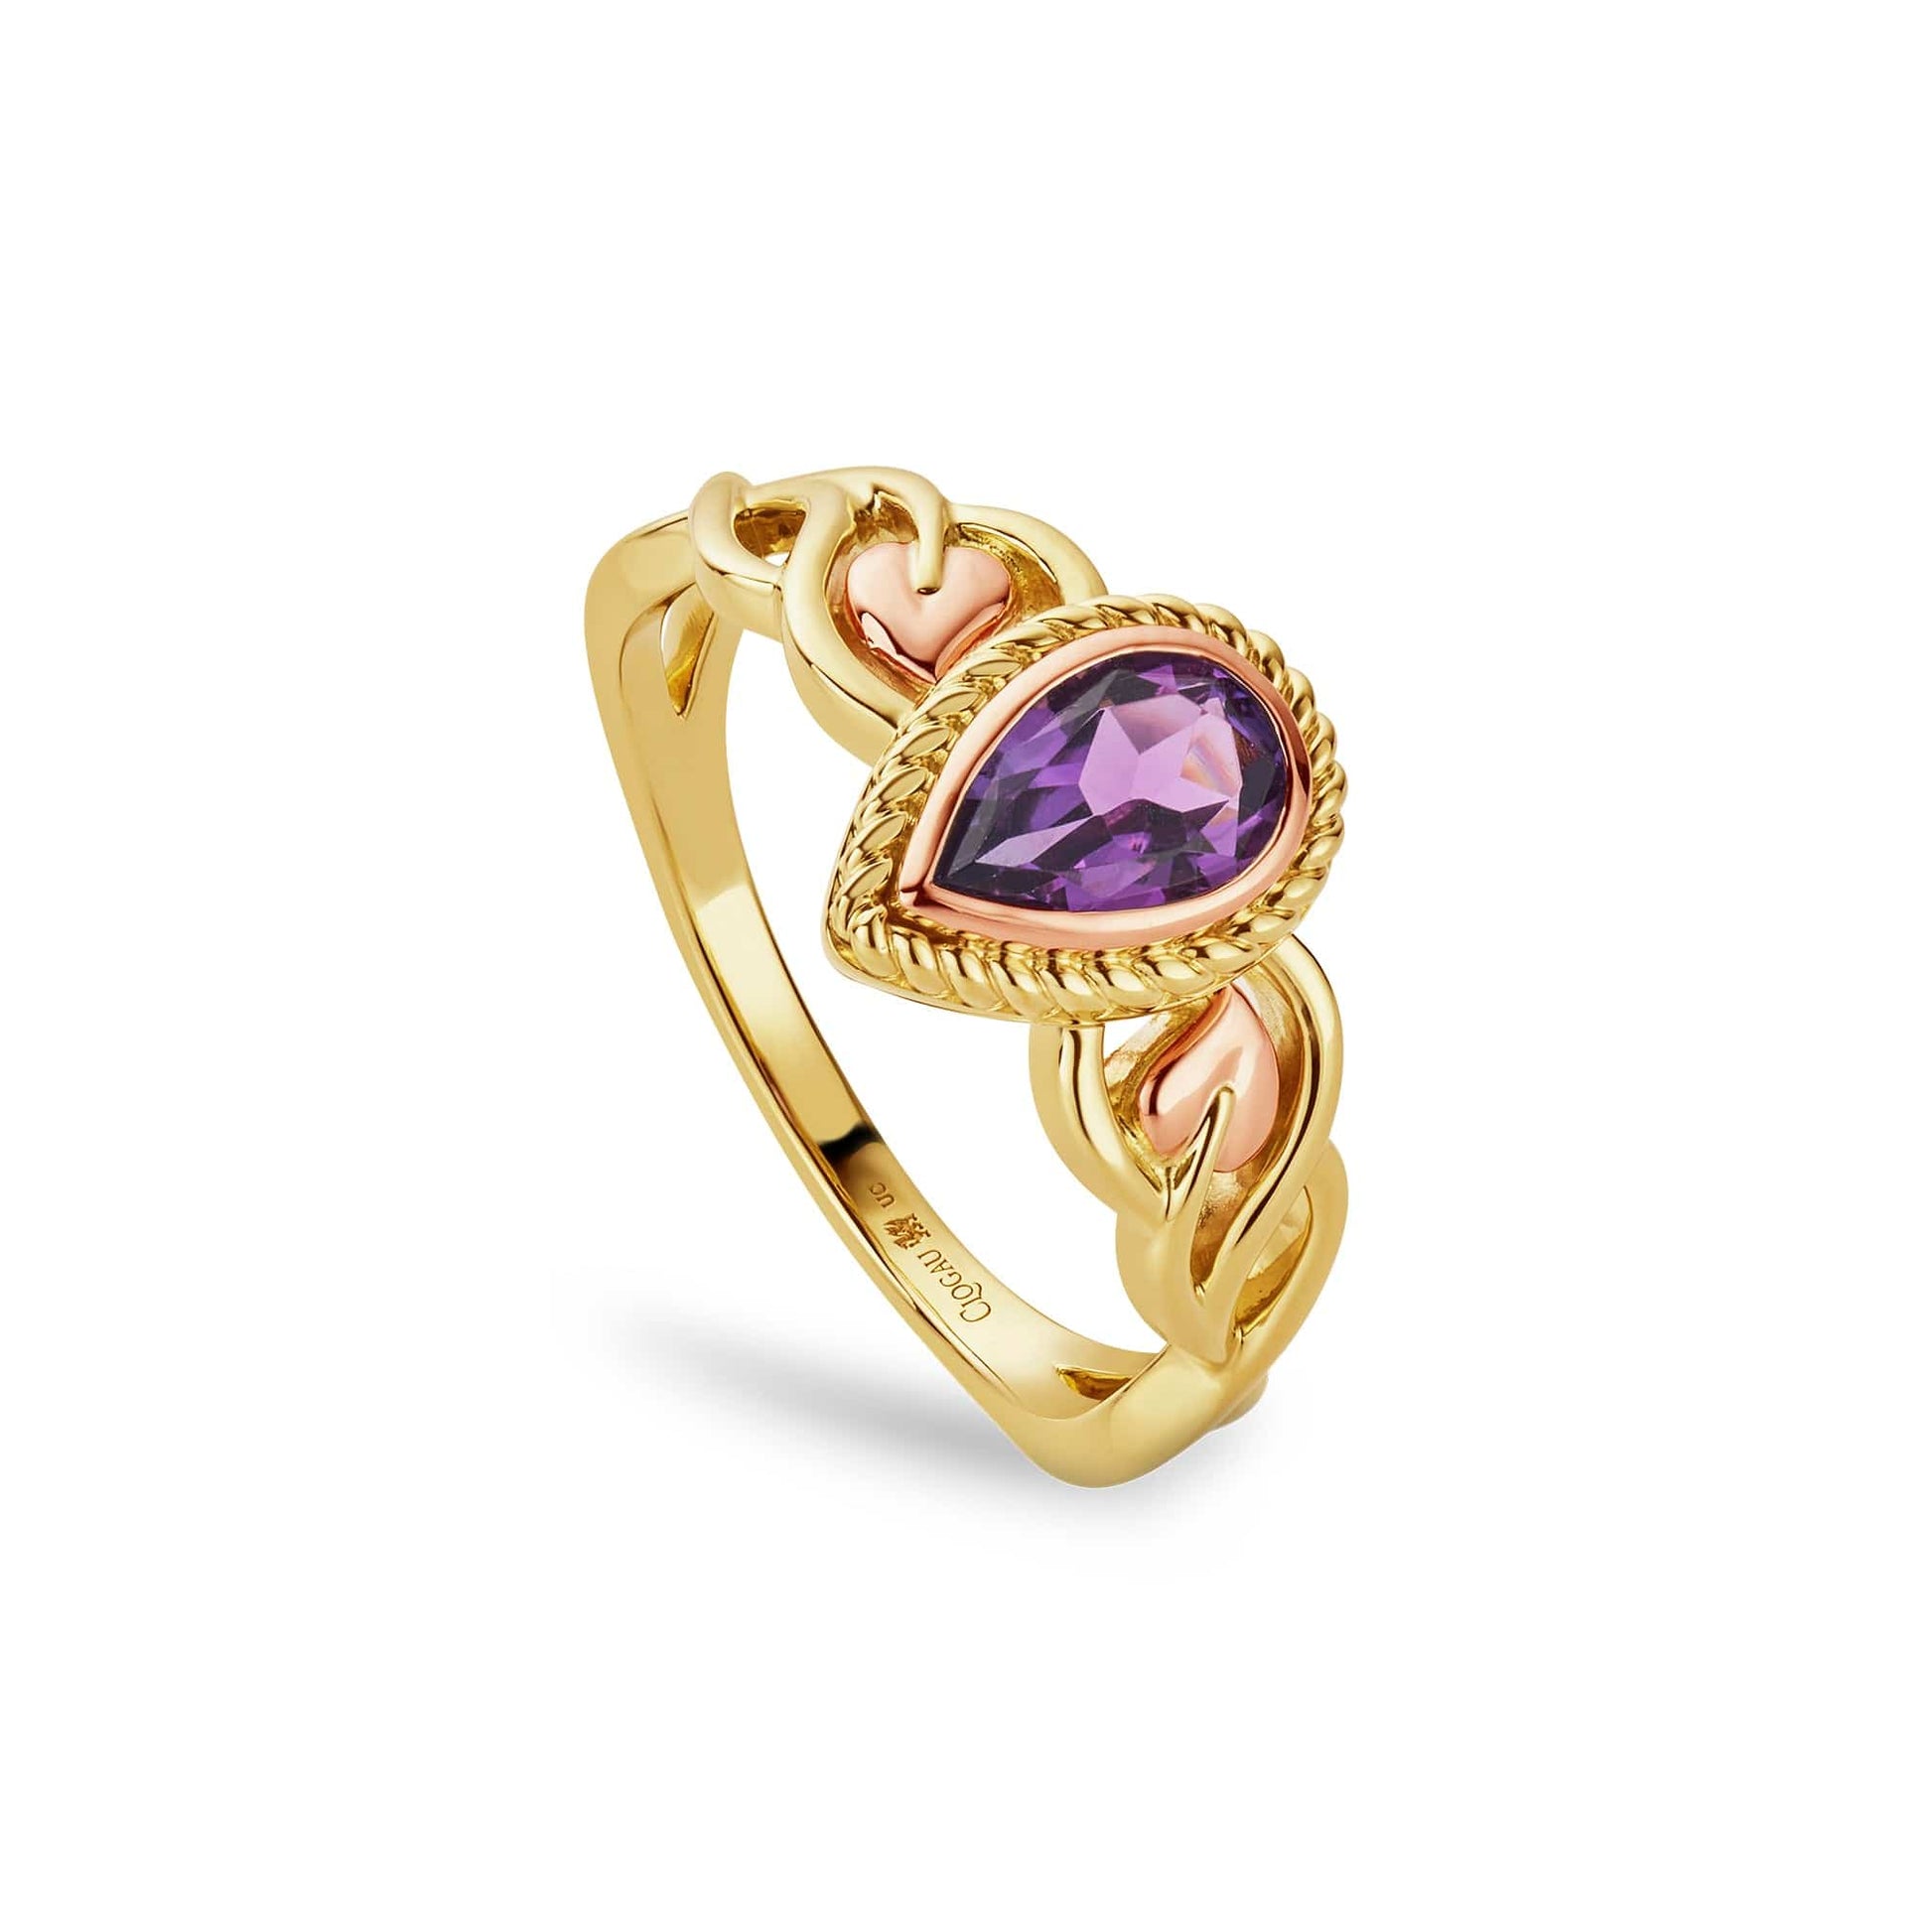 Delphinium Gold and Amethyst Ring